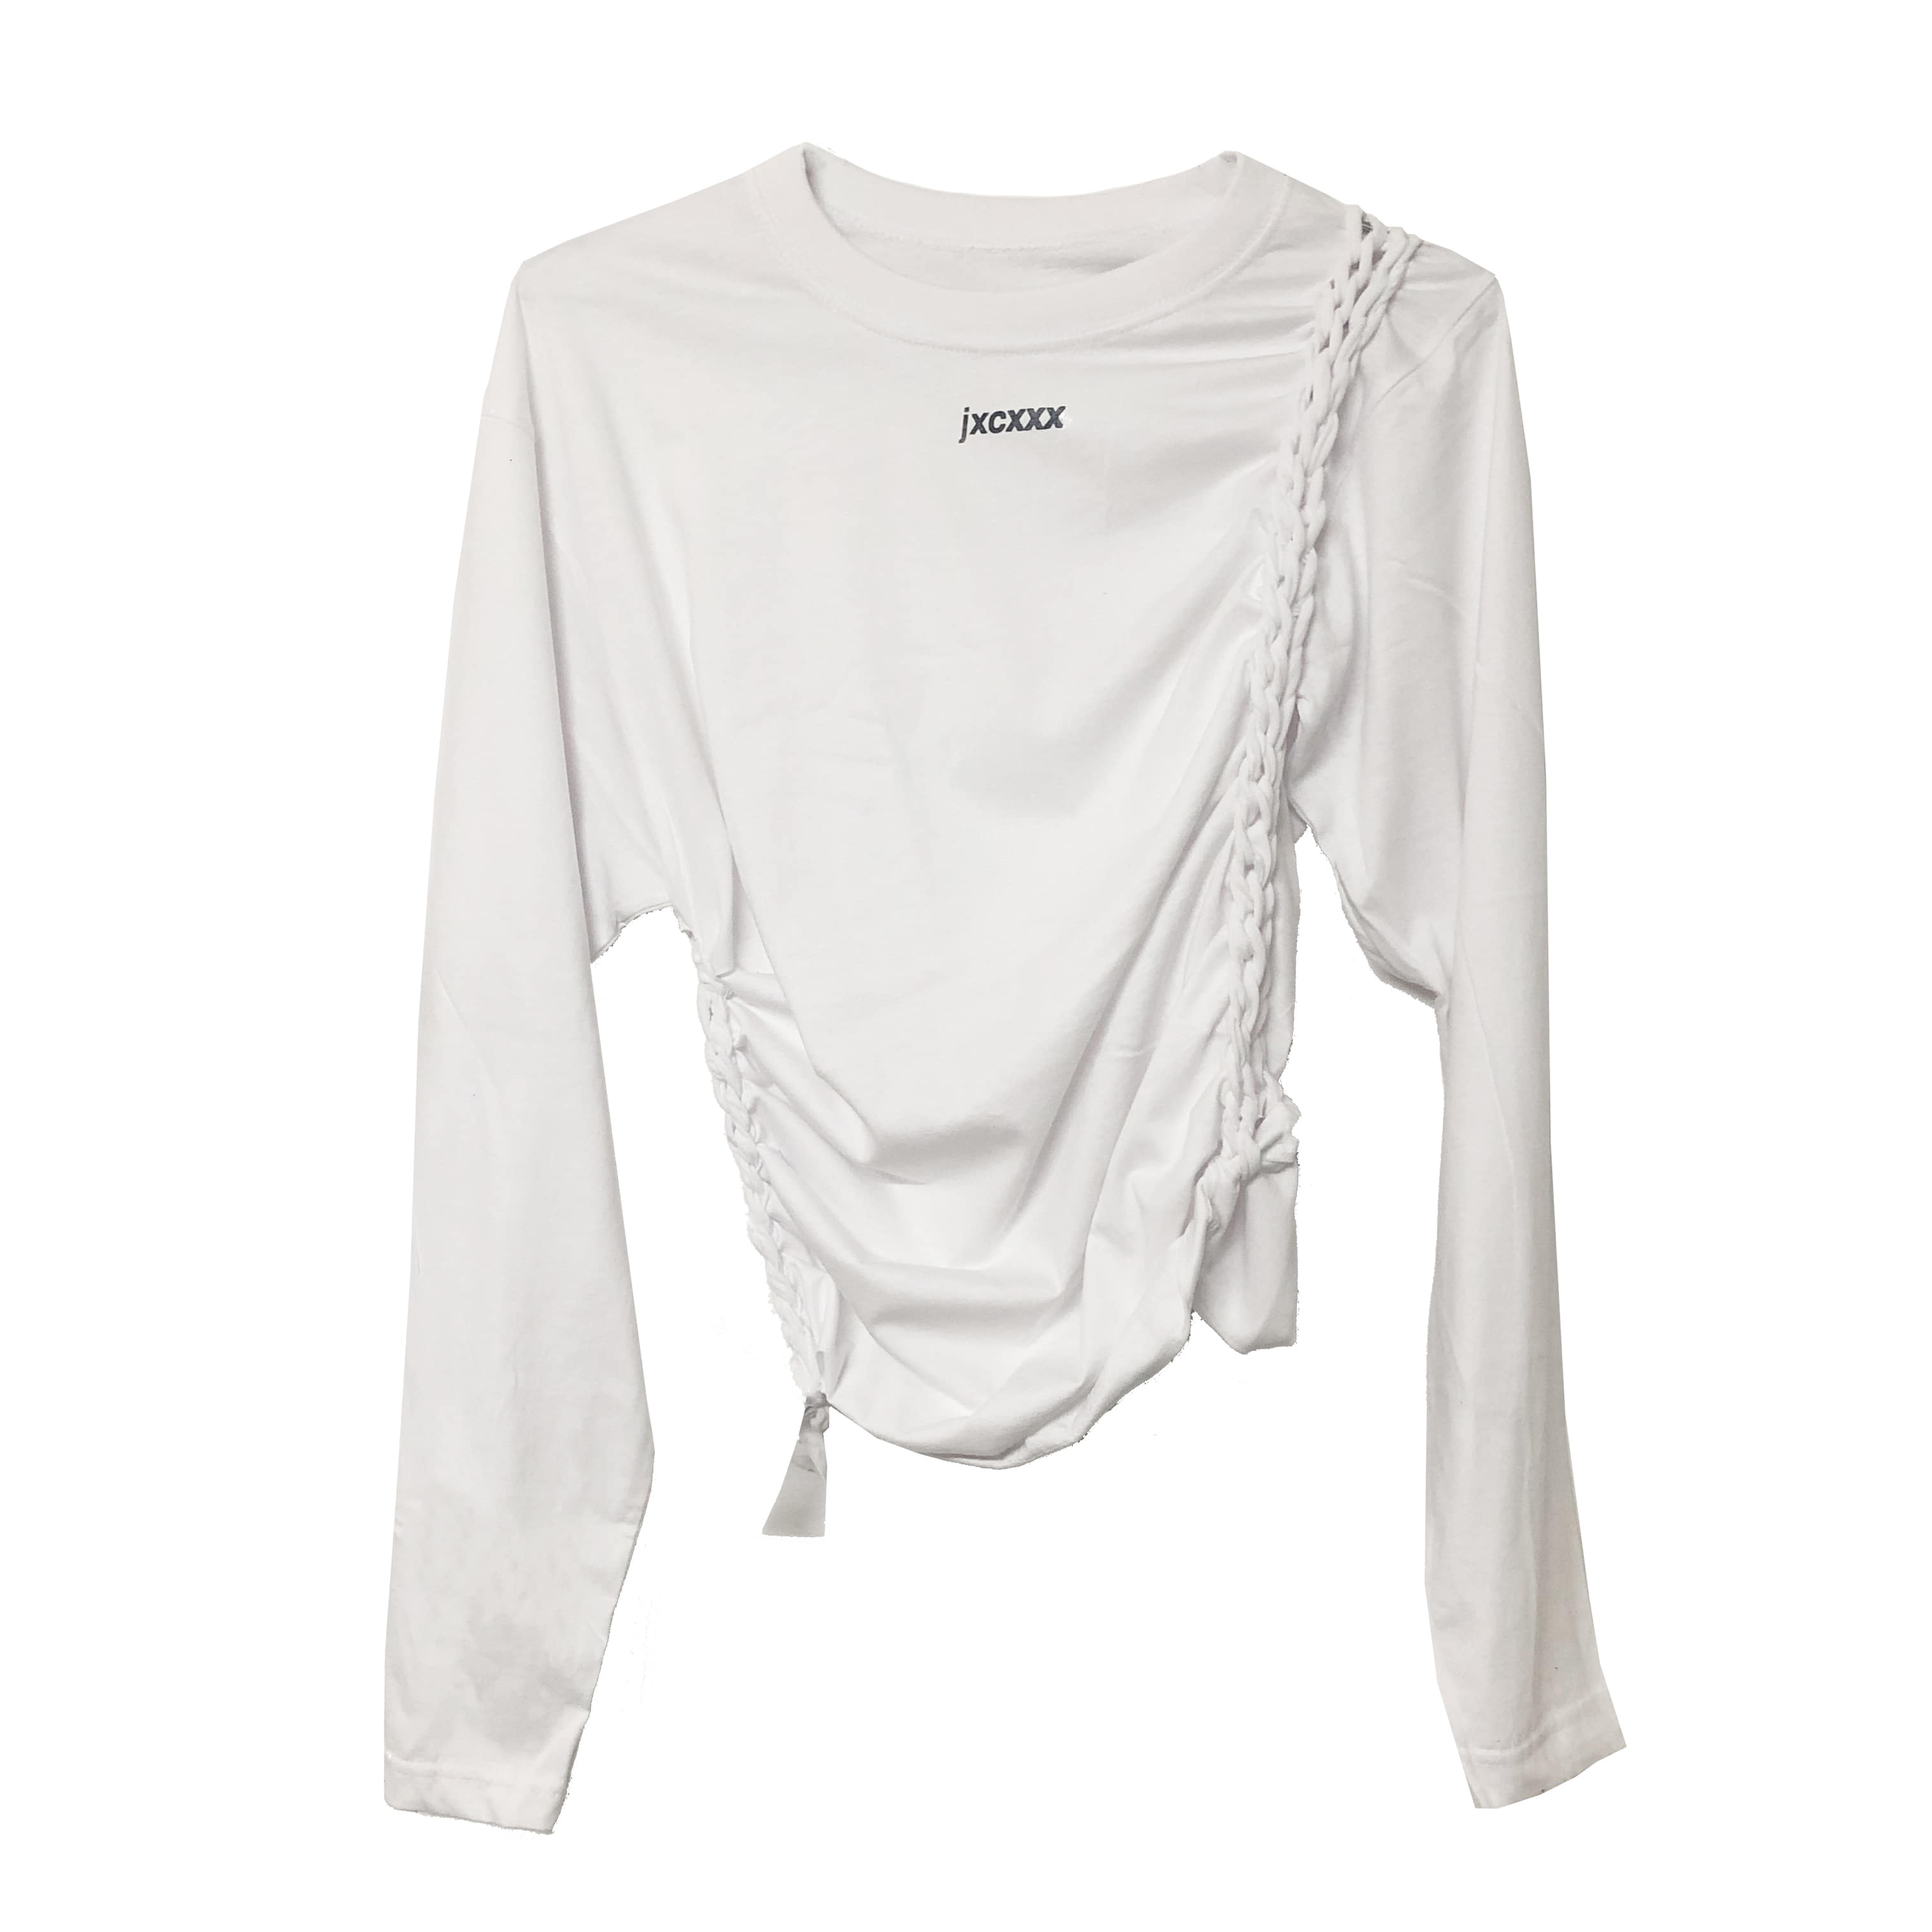 jxcxxx TWISTED LONG SLEEVES (WHITE)